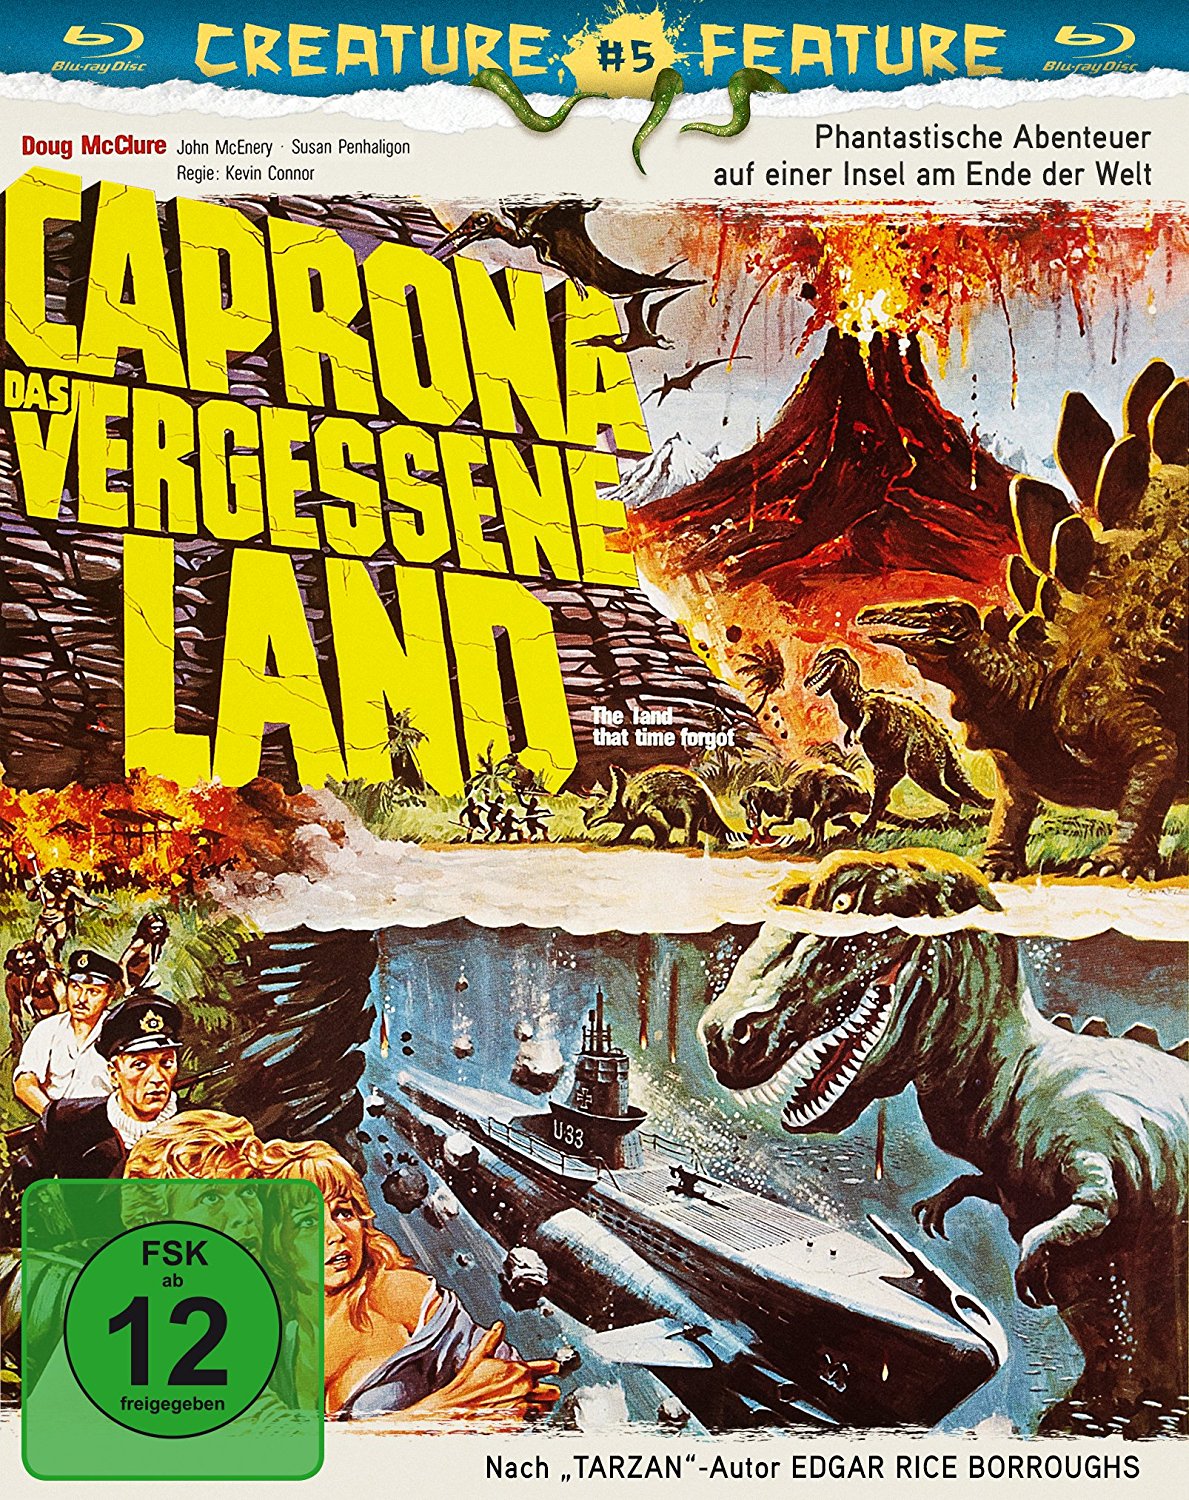 The Land that time forgot 1975 poster. The Adventure you will never forget! Edgar Rice Burroughts the Land that time forgot 1975.